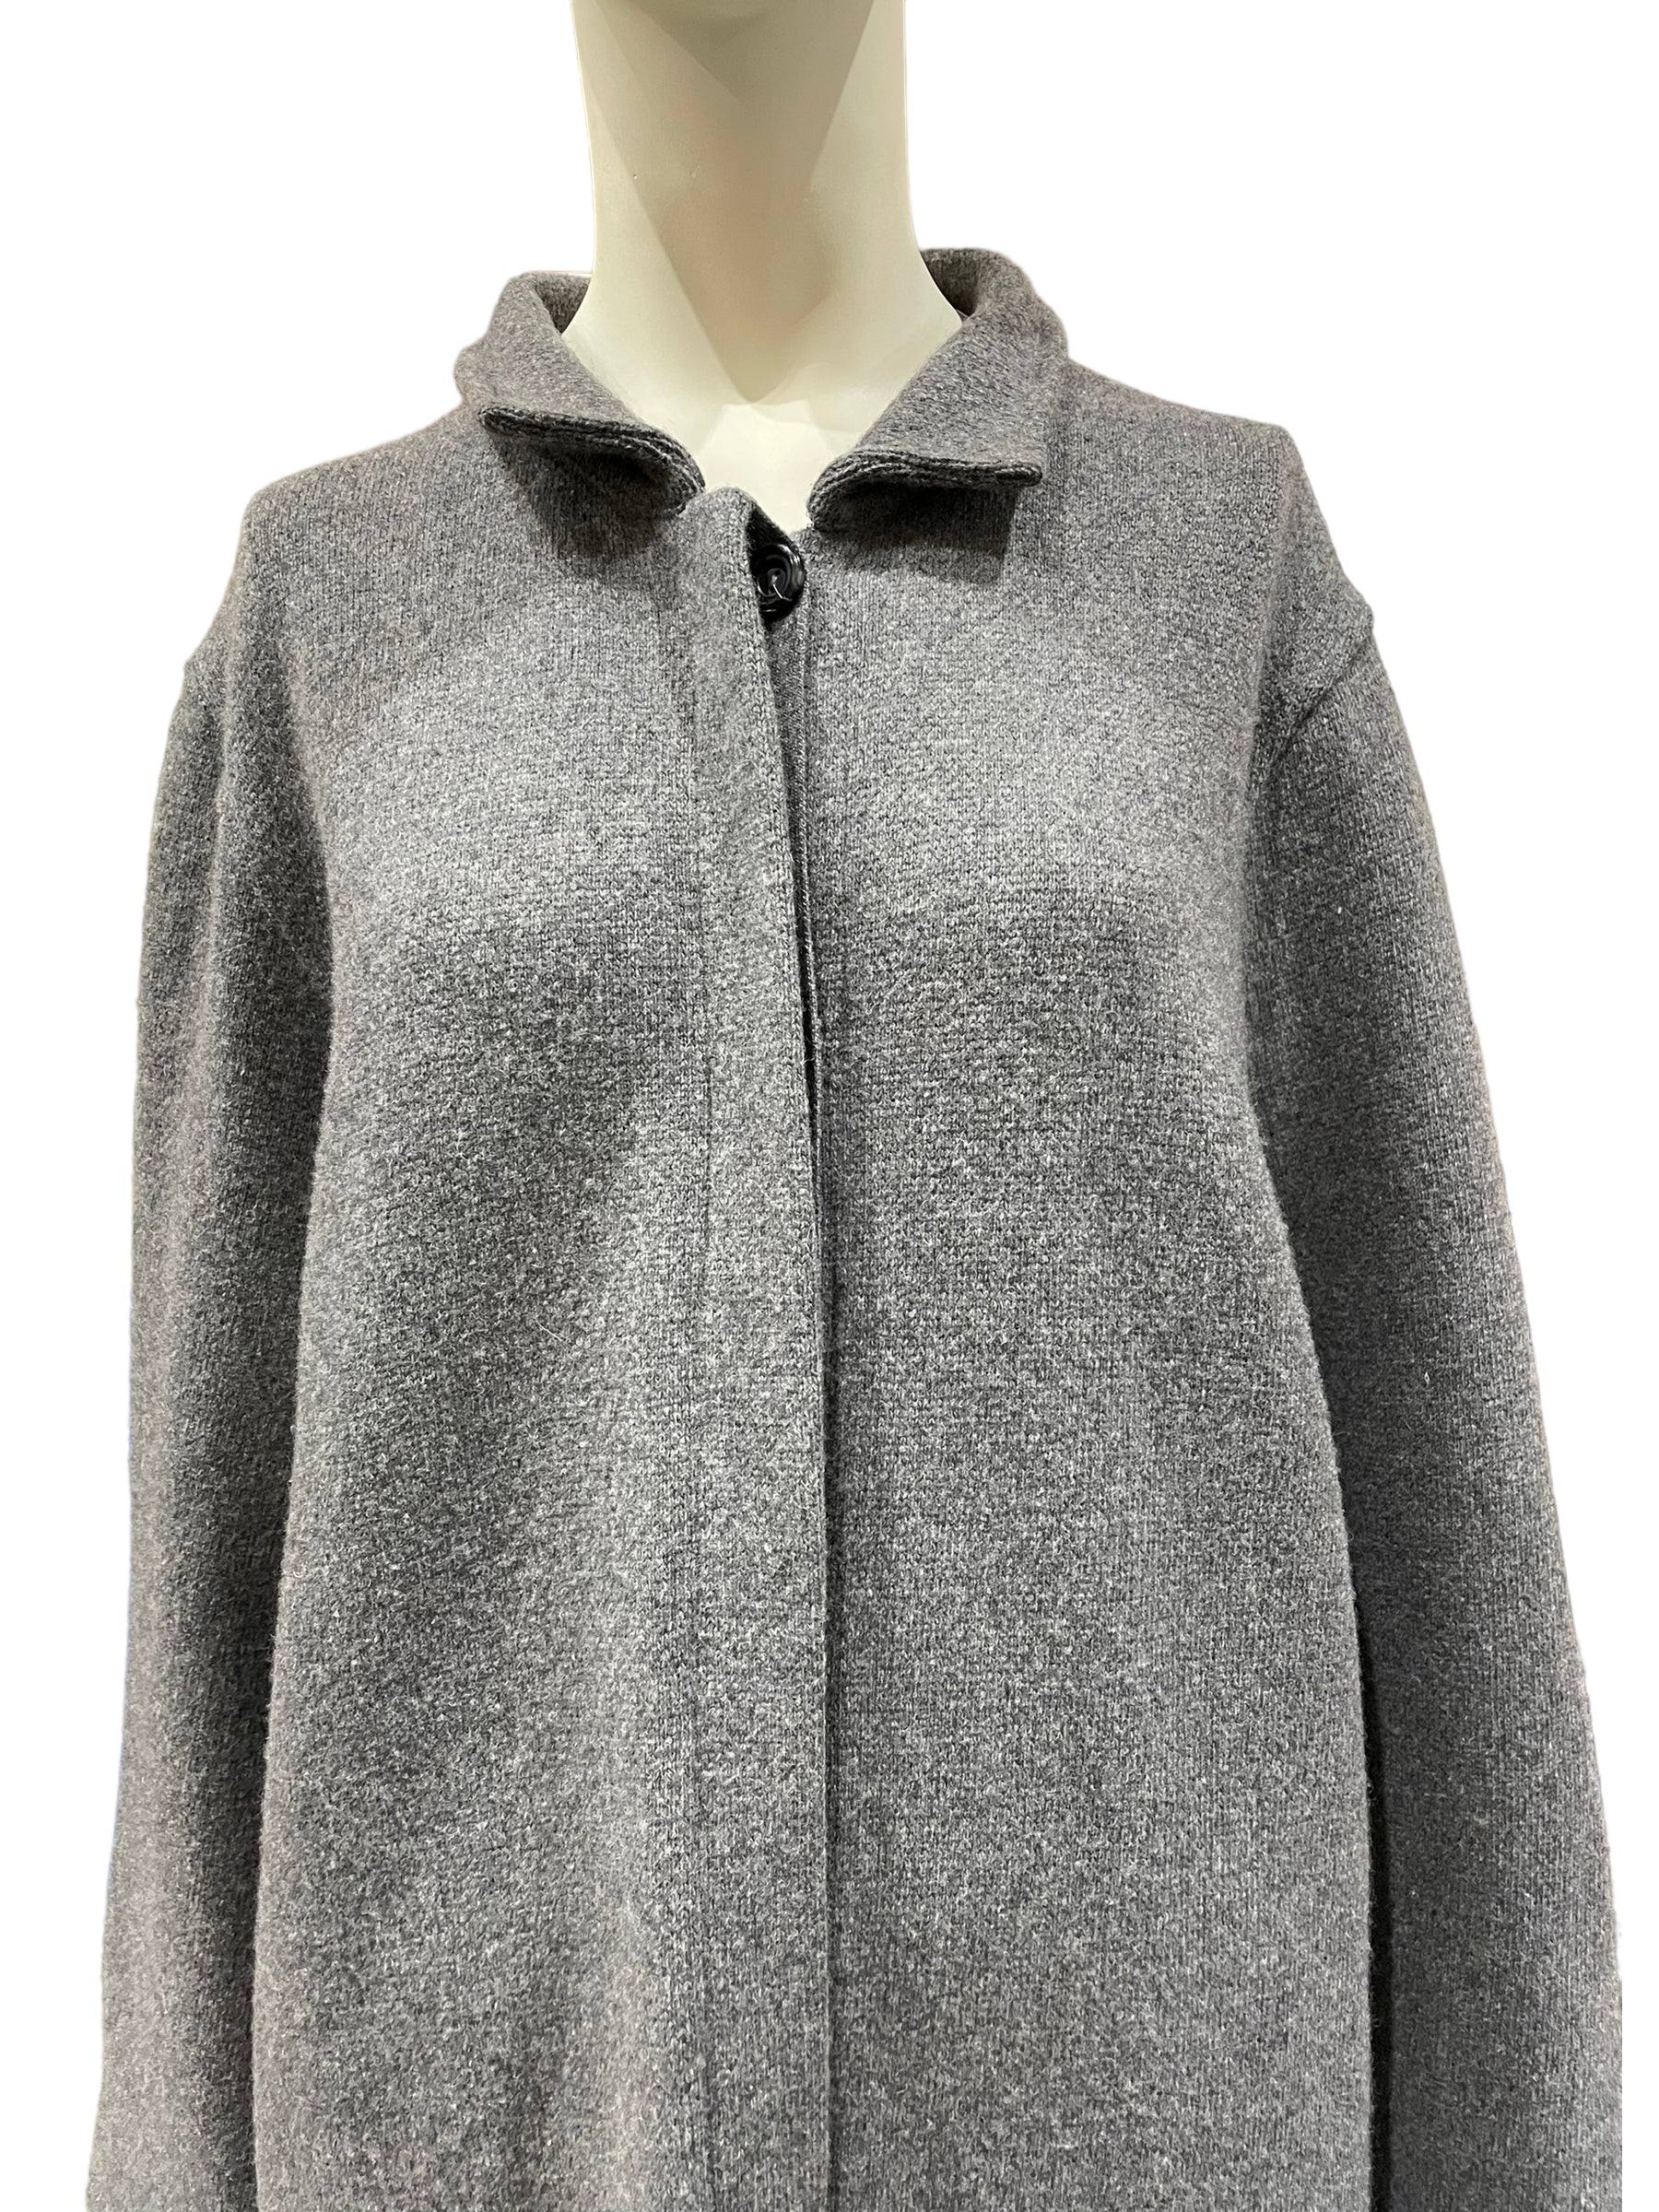 Morgano Made in Italy Grey Wool Long Coat - Size Large